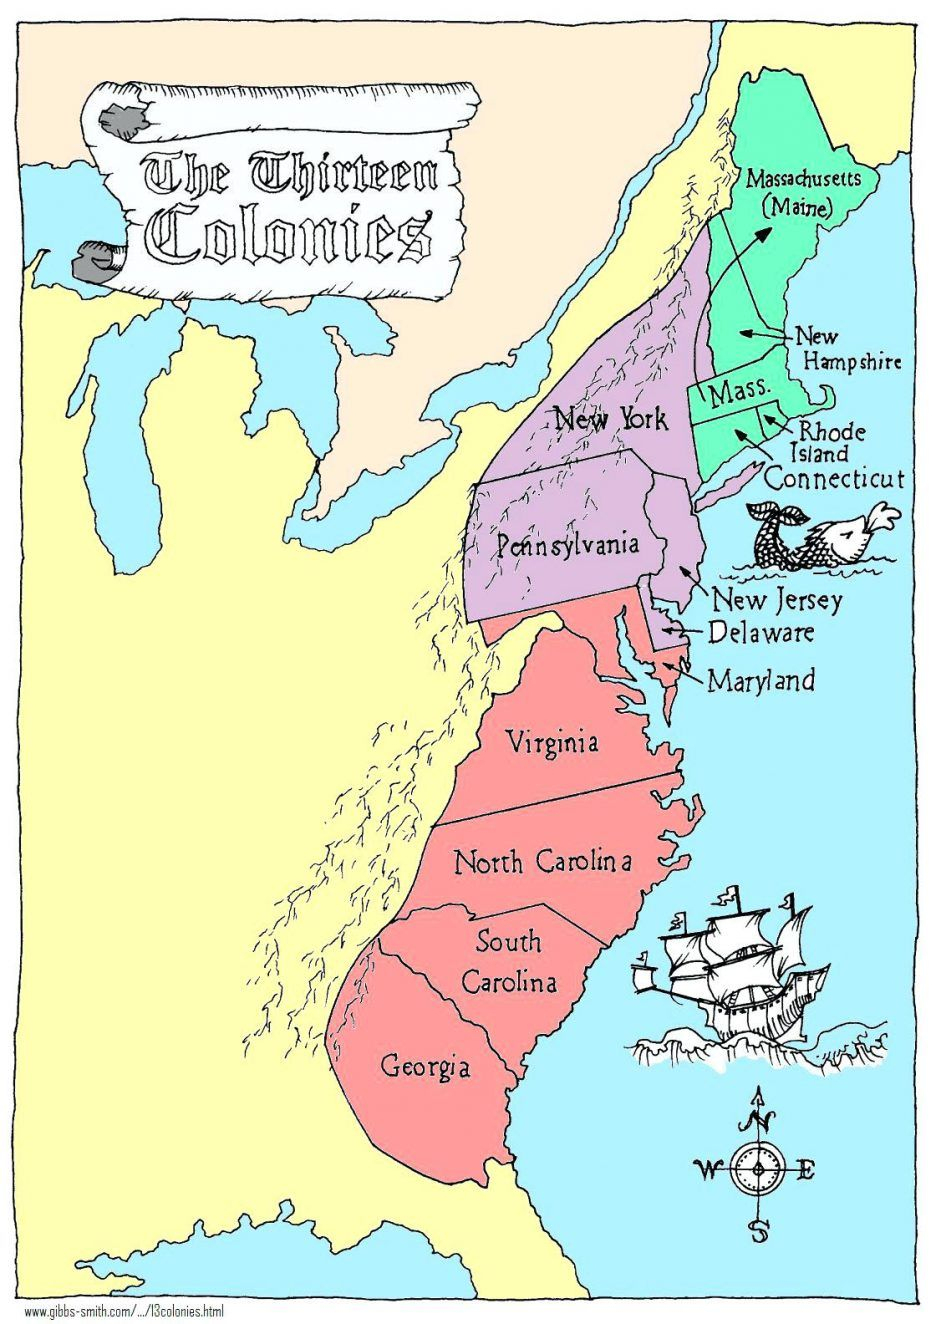 Coloring Pages: 13 Colonies Map Printable Labeled With Cities Blank - 13 Colonies Map Printable